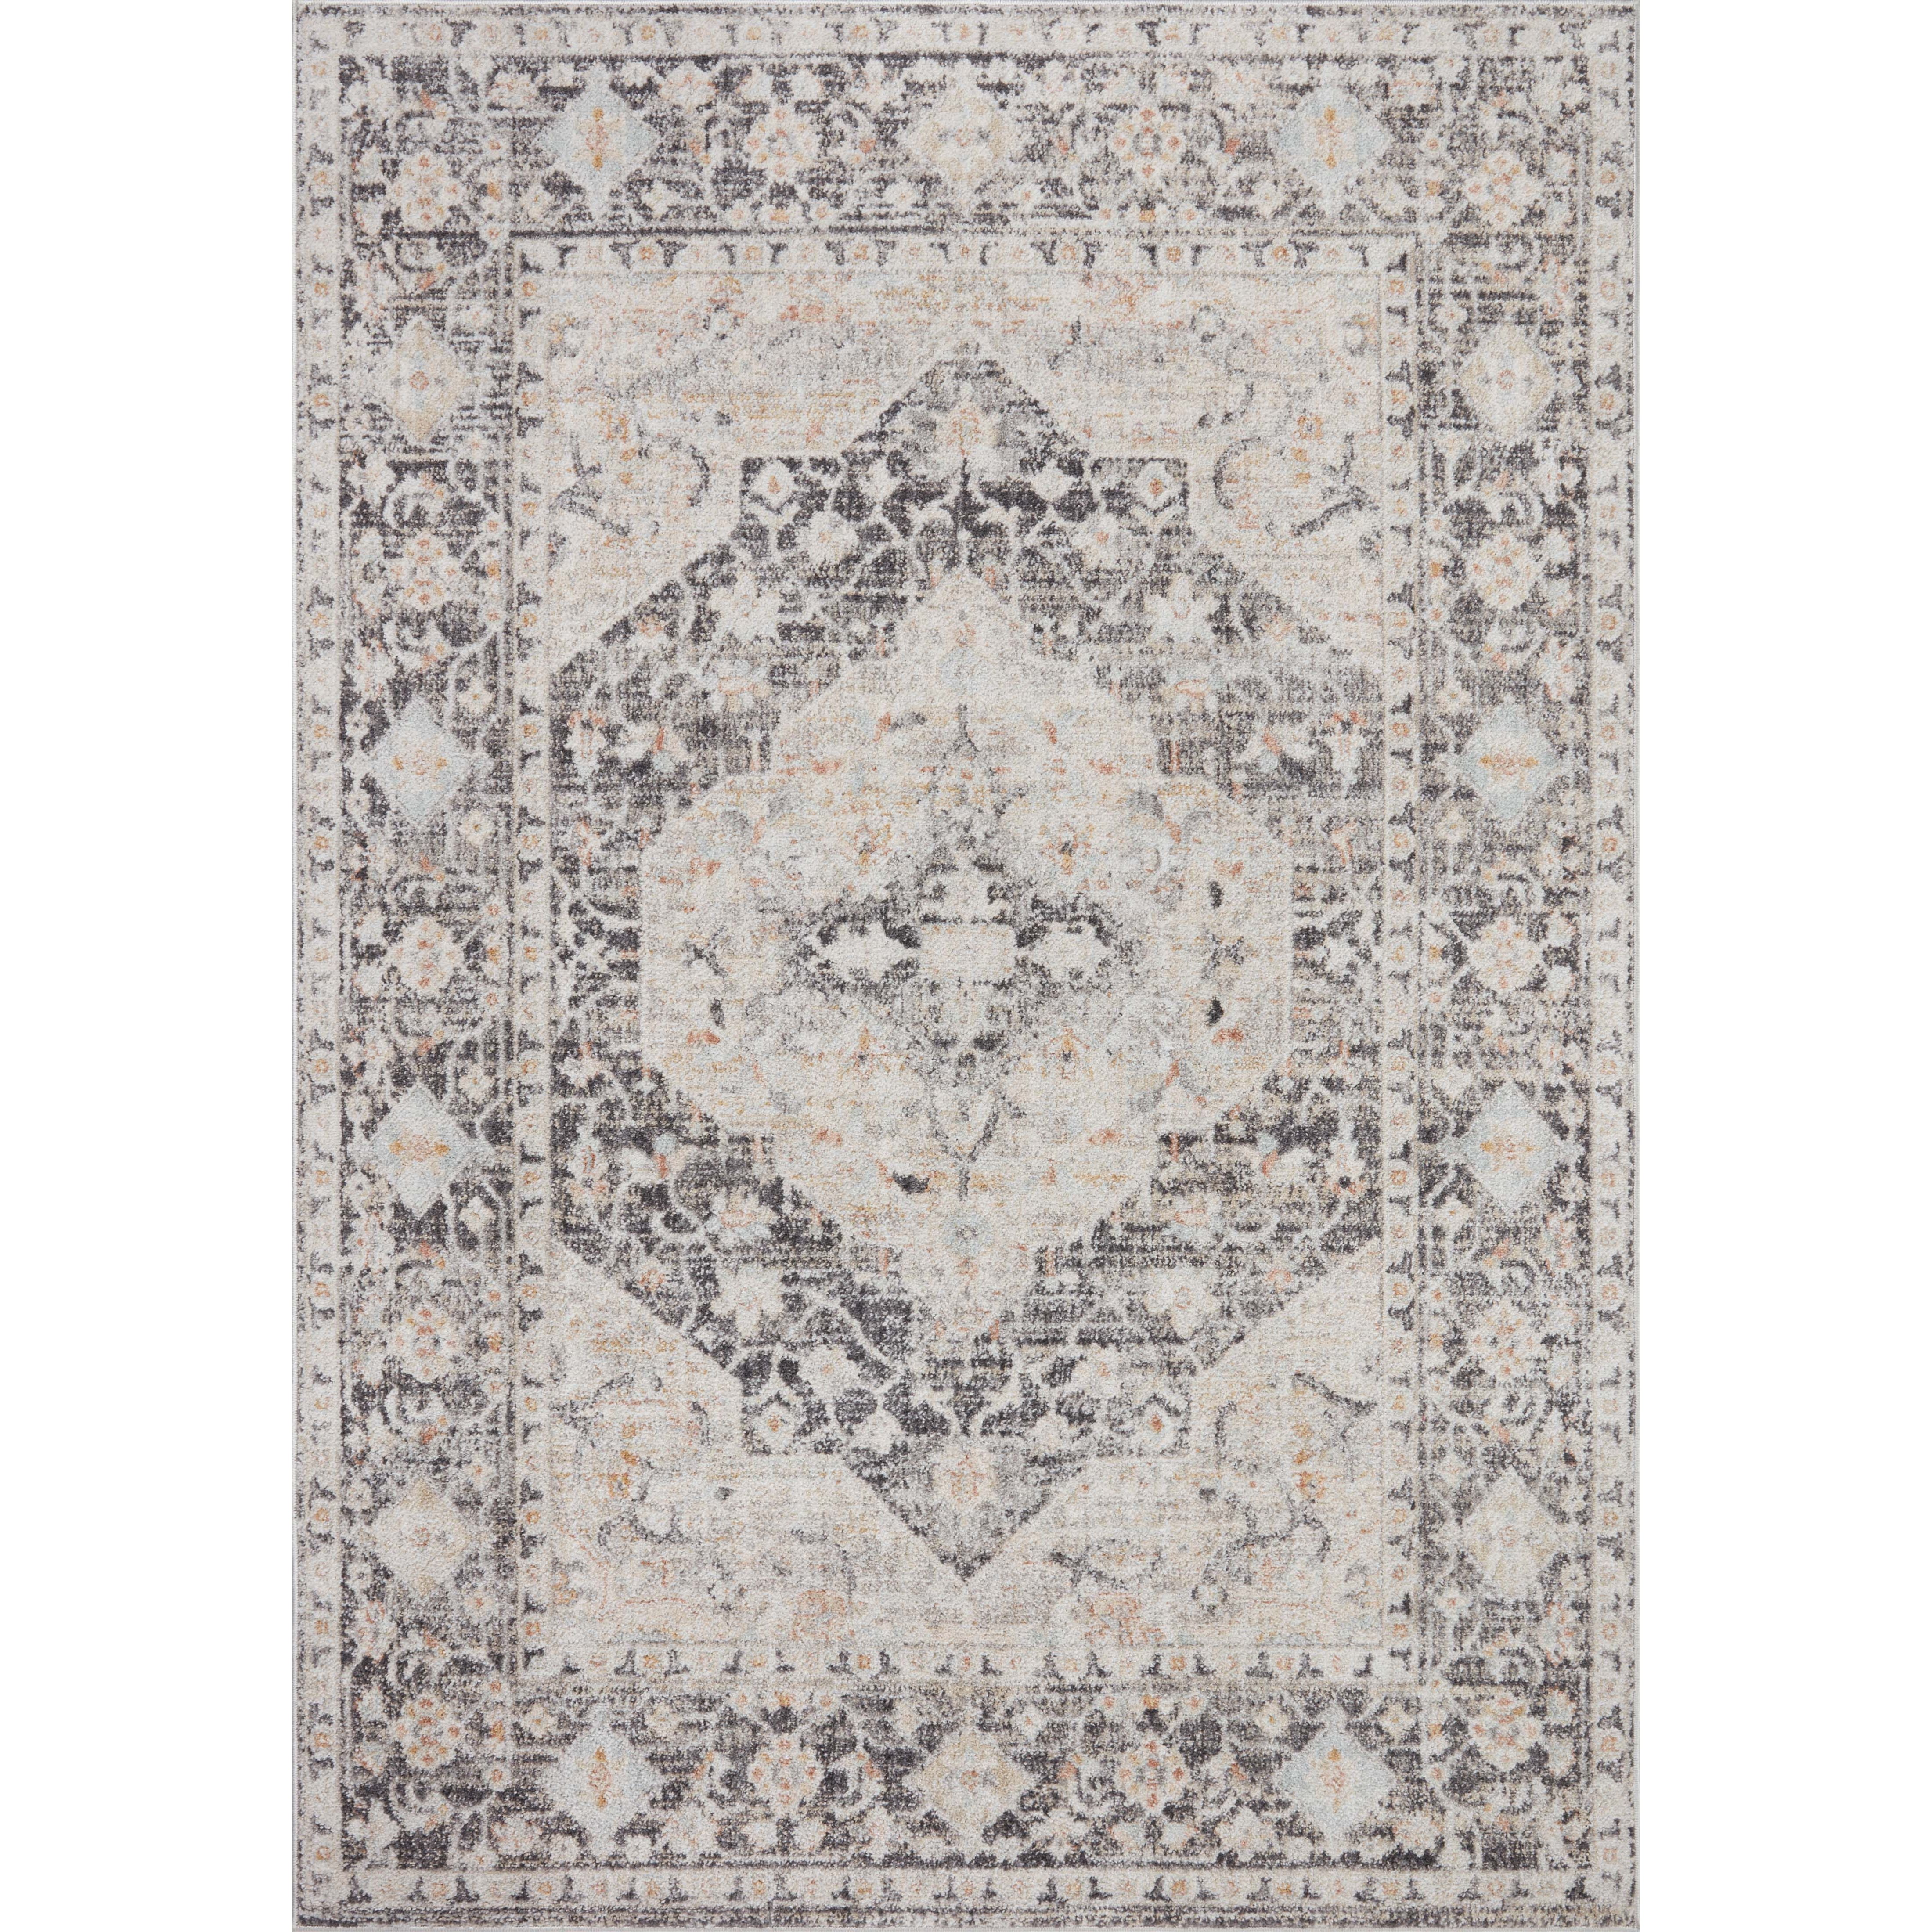 Inspired by antique Turkish Oushak carpets with large-scale motifs, the Monroe Charcoal / Multi Rug modernizes the traditional design in neutral palettes, many of which have black details that anchor the rug in the room. Monroe is power-loomed of 100% polypropylene for easy care and reliable durability. Amethyst Home provides interior design, new construction, custom furniture, and area rugs in the Charlotte metro area.